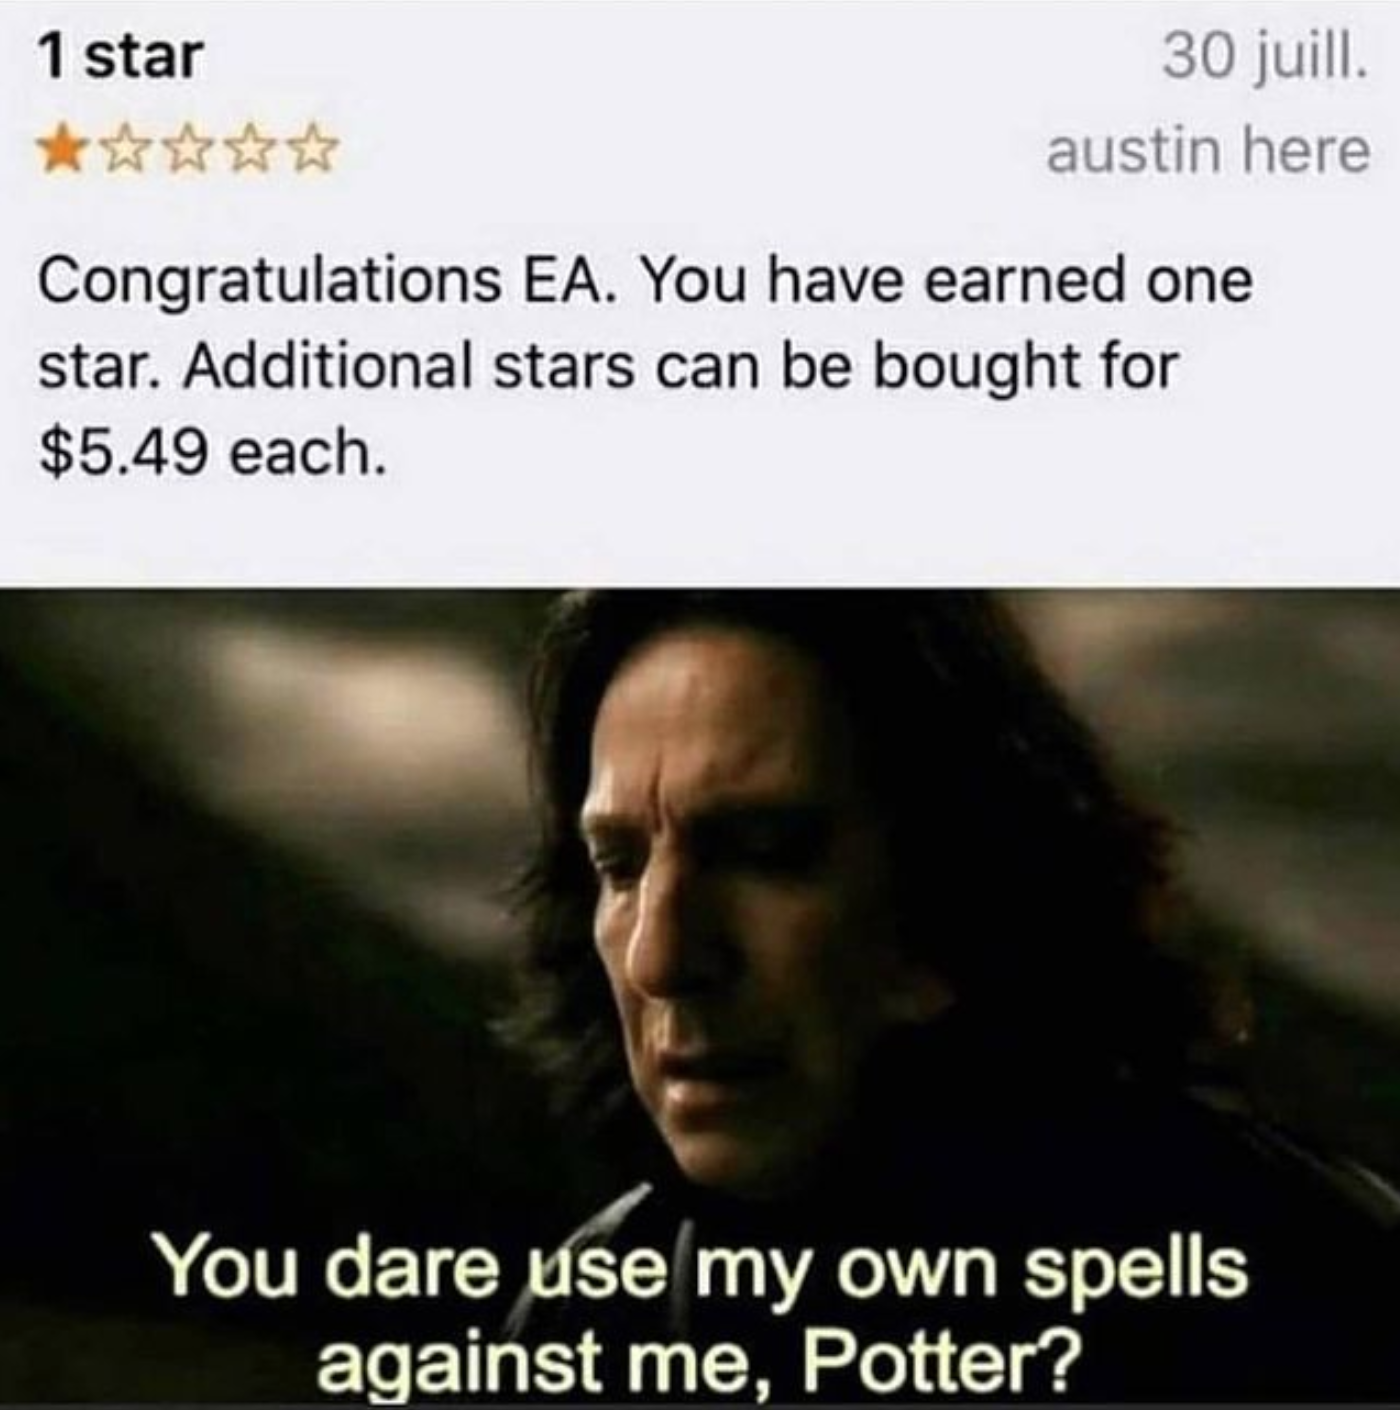 funny gaming memes - harry potter memes - 1 star 30 juill. austin here Congratulations Ea. You have earned one star. Additional stars can be bought for $5.49 each. You dare use my own spells against me, Potter?